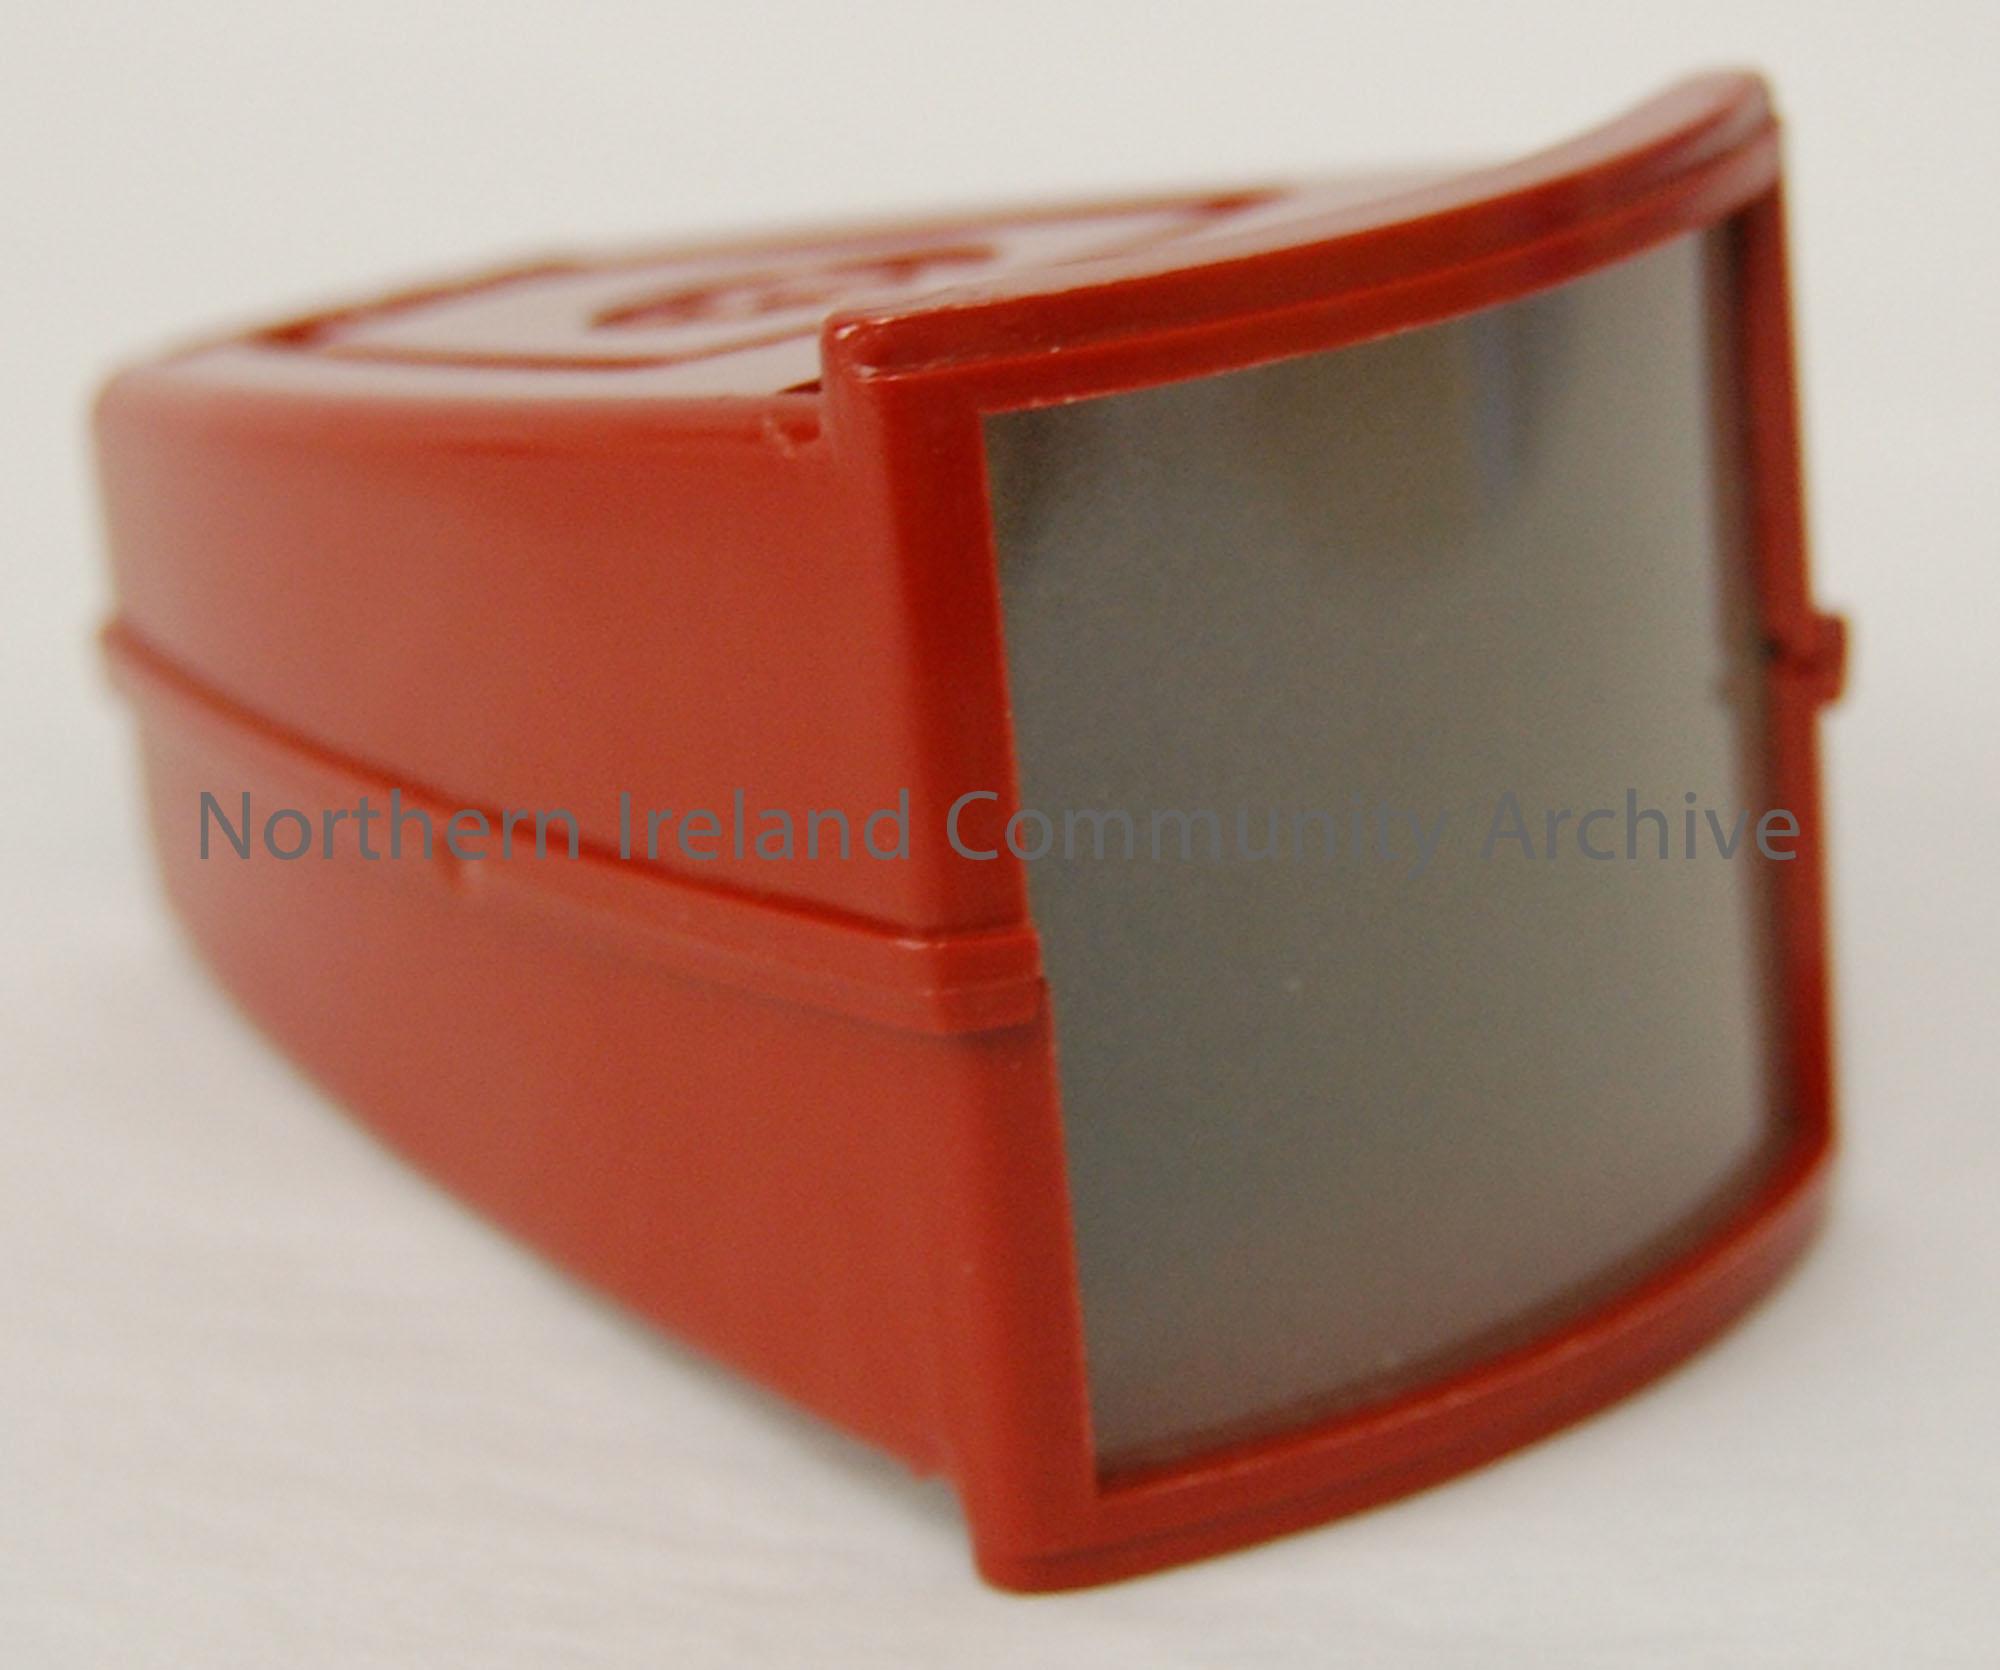 35mm slide viewer, red with box